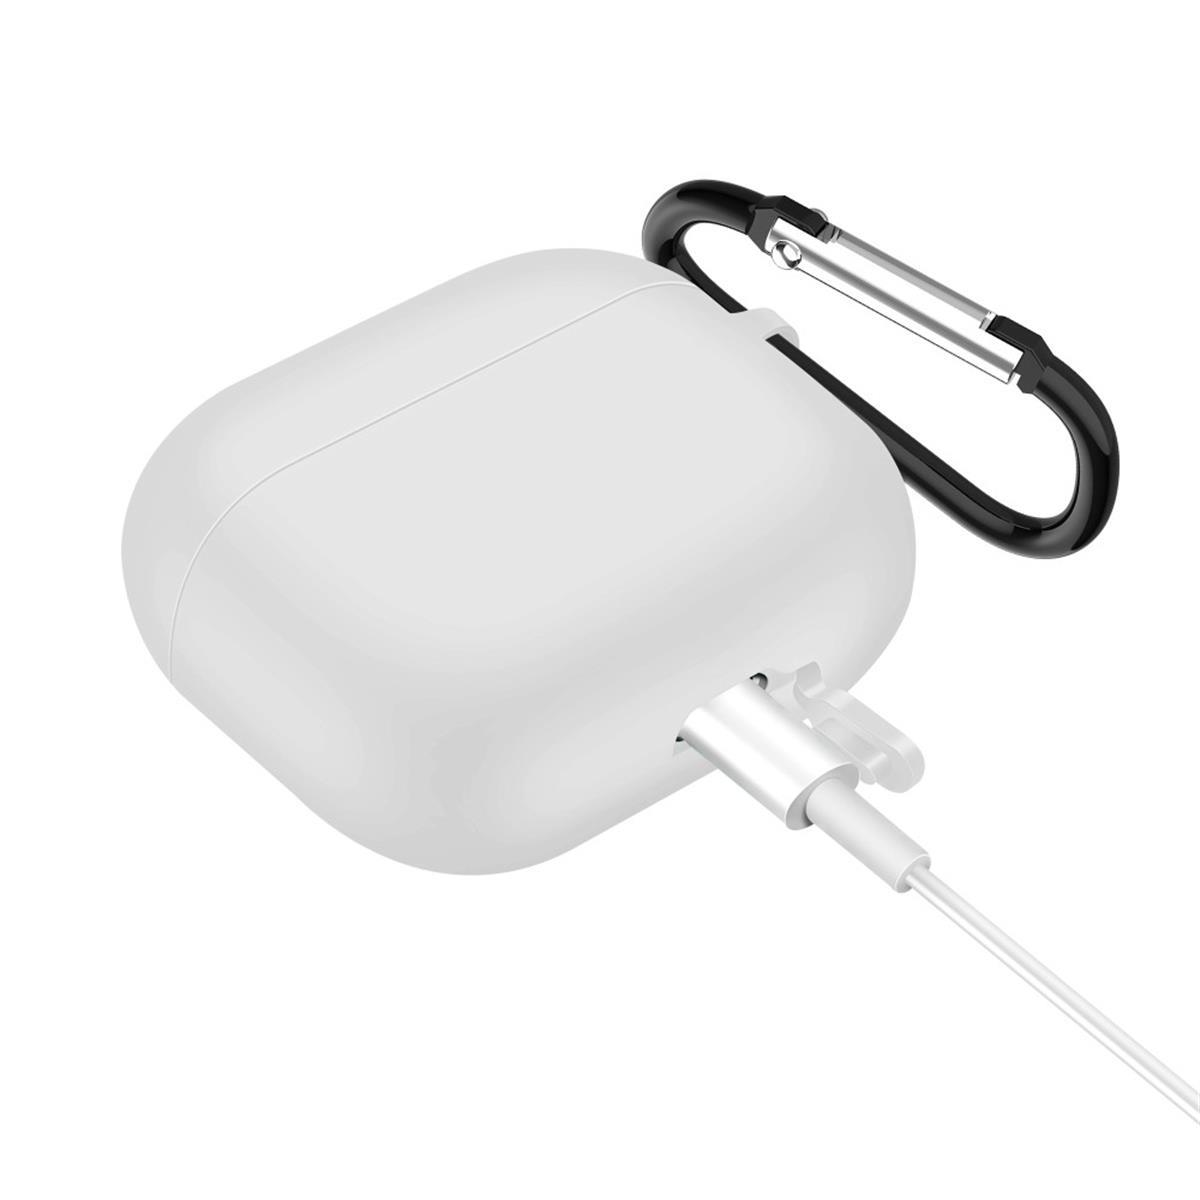 COVERKINGZ Silikoncover Ladecase für Apple AirPods Unisex, Weiß, 76801 3